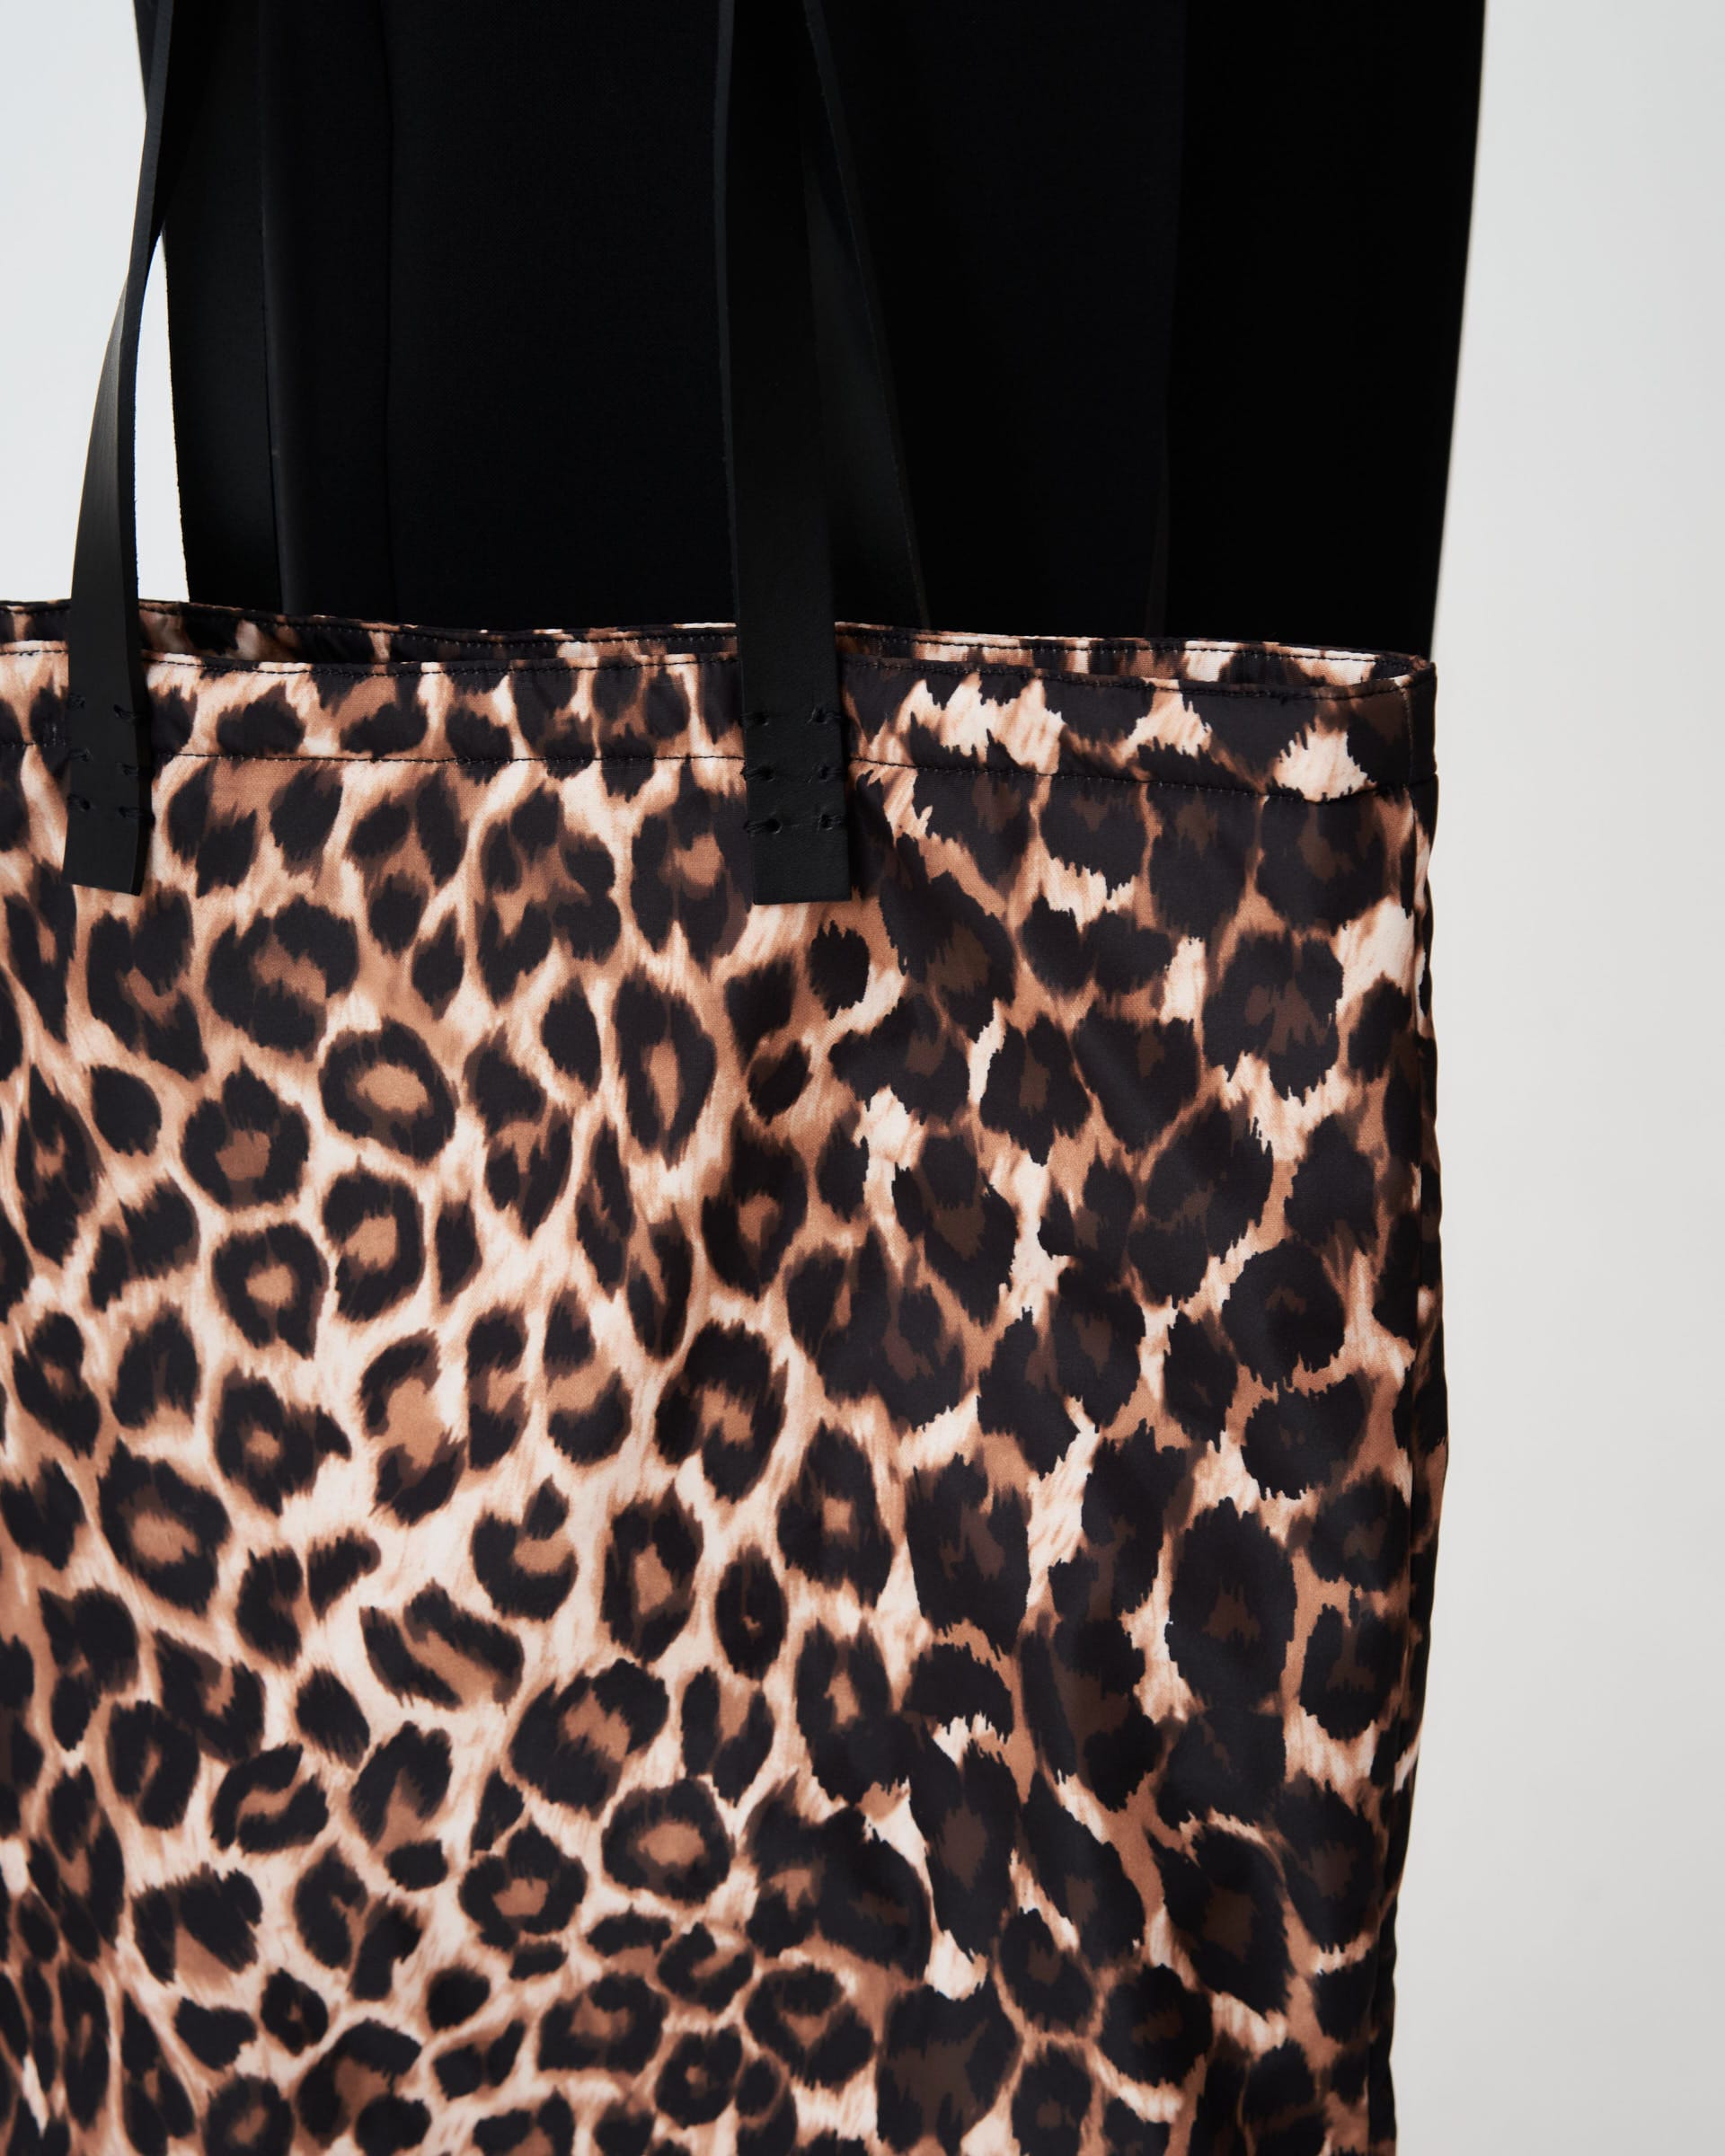 The Market Store | Large Spotted Nylon Bag